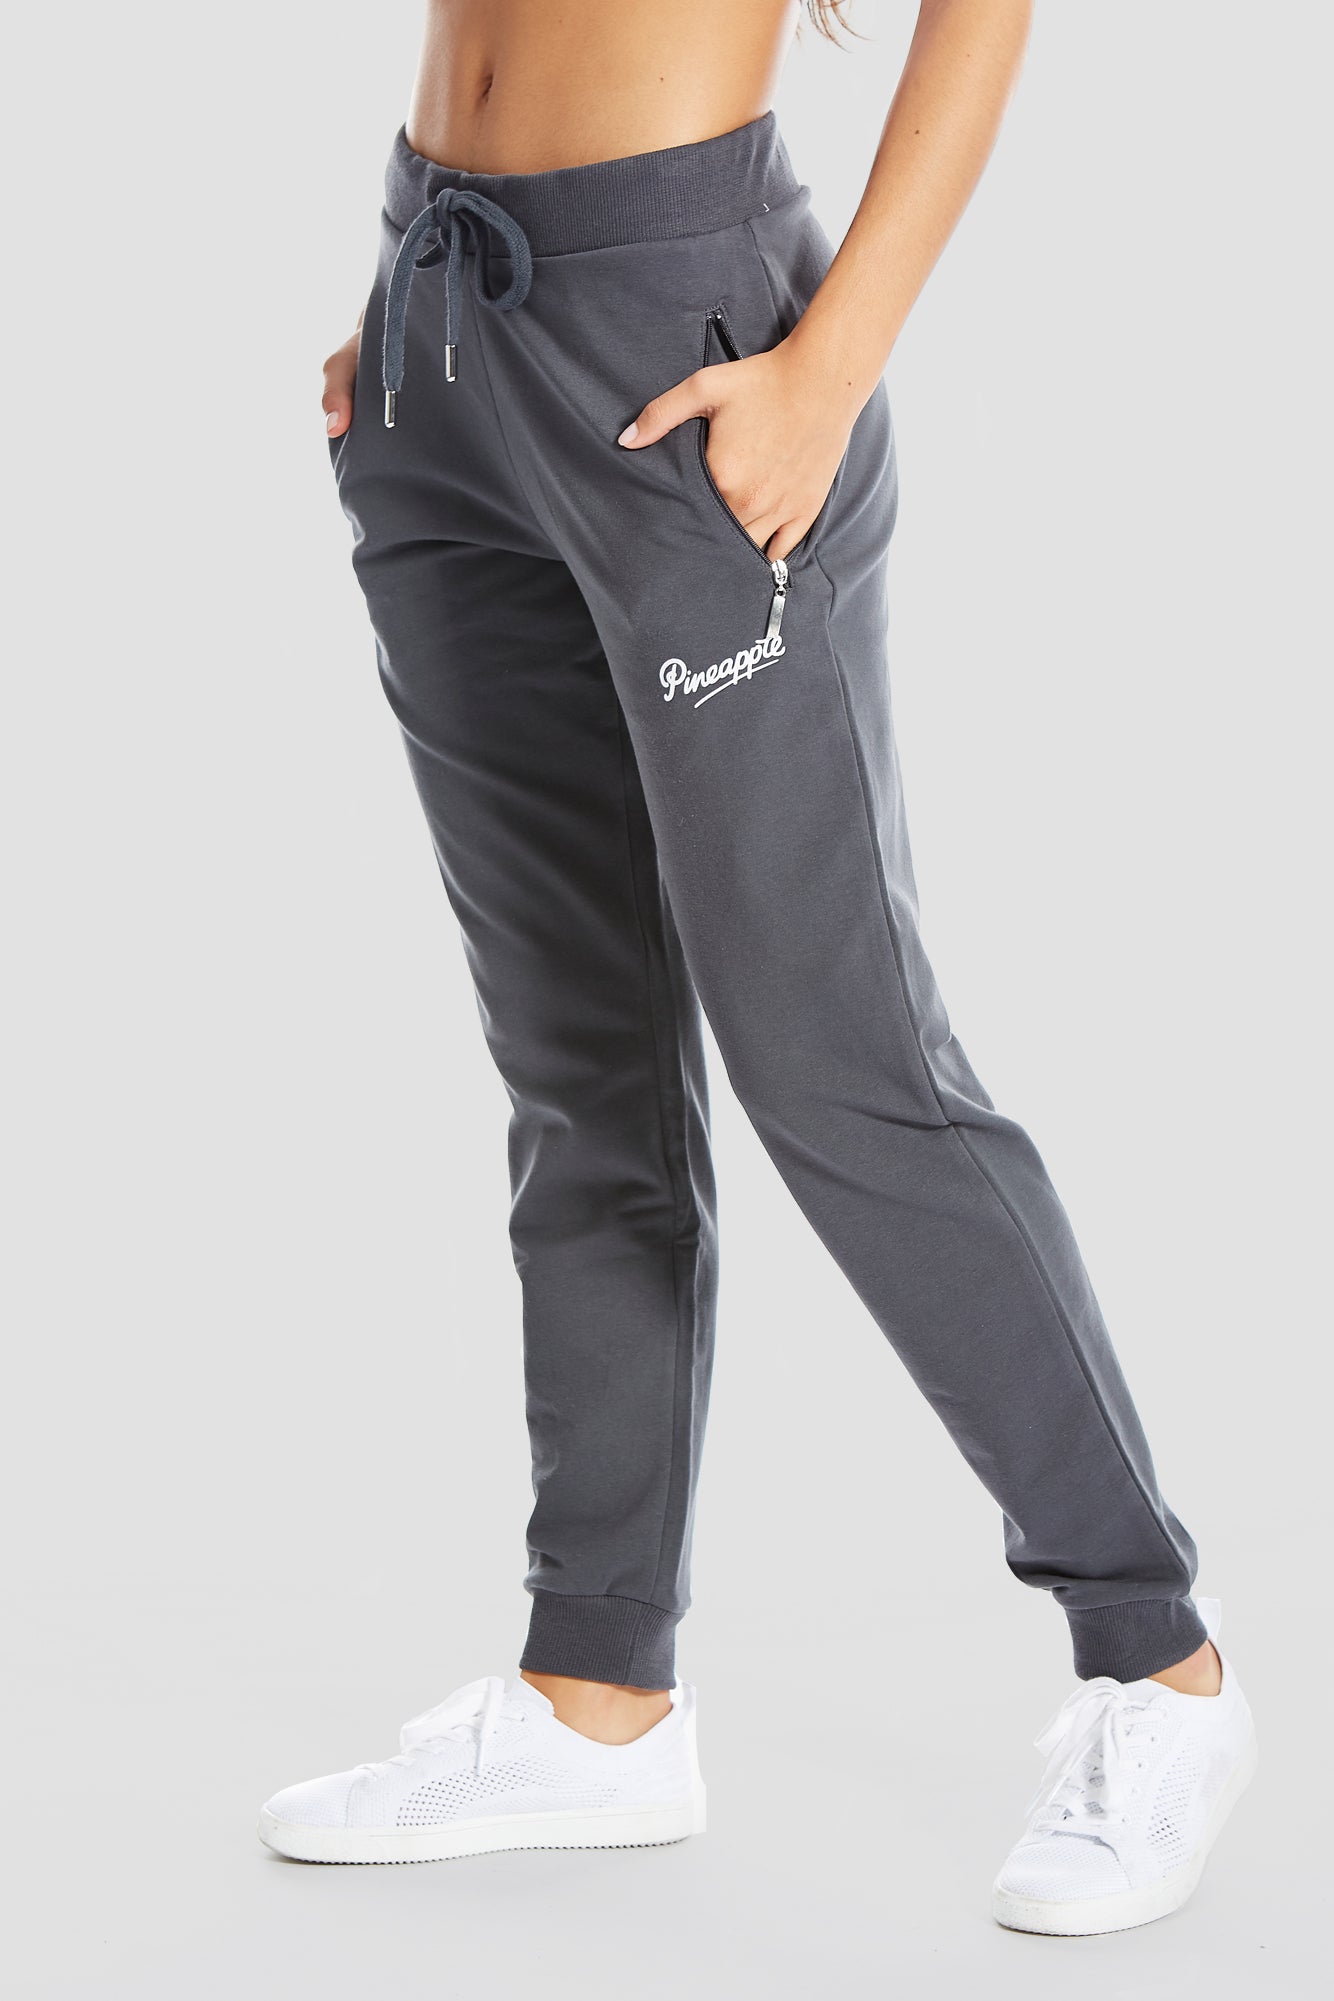 Buy Pineapple Womens Black Combat Joggers from Next Luxembourg